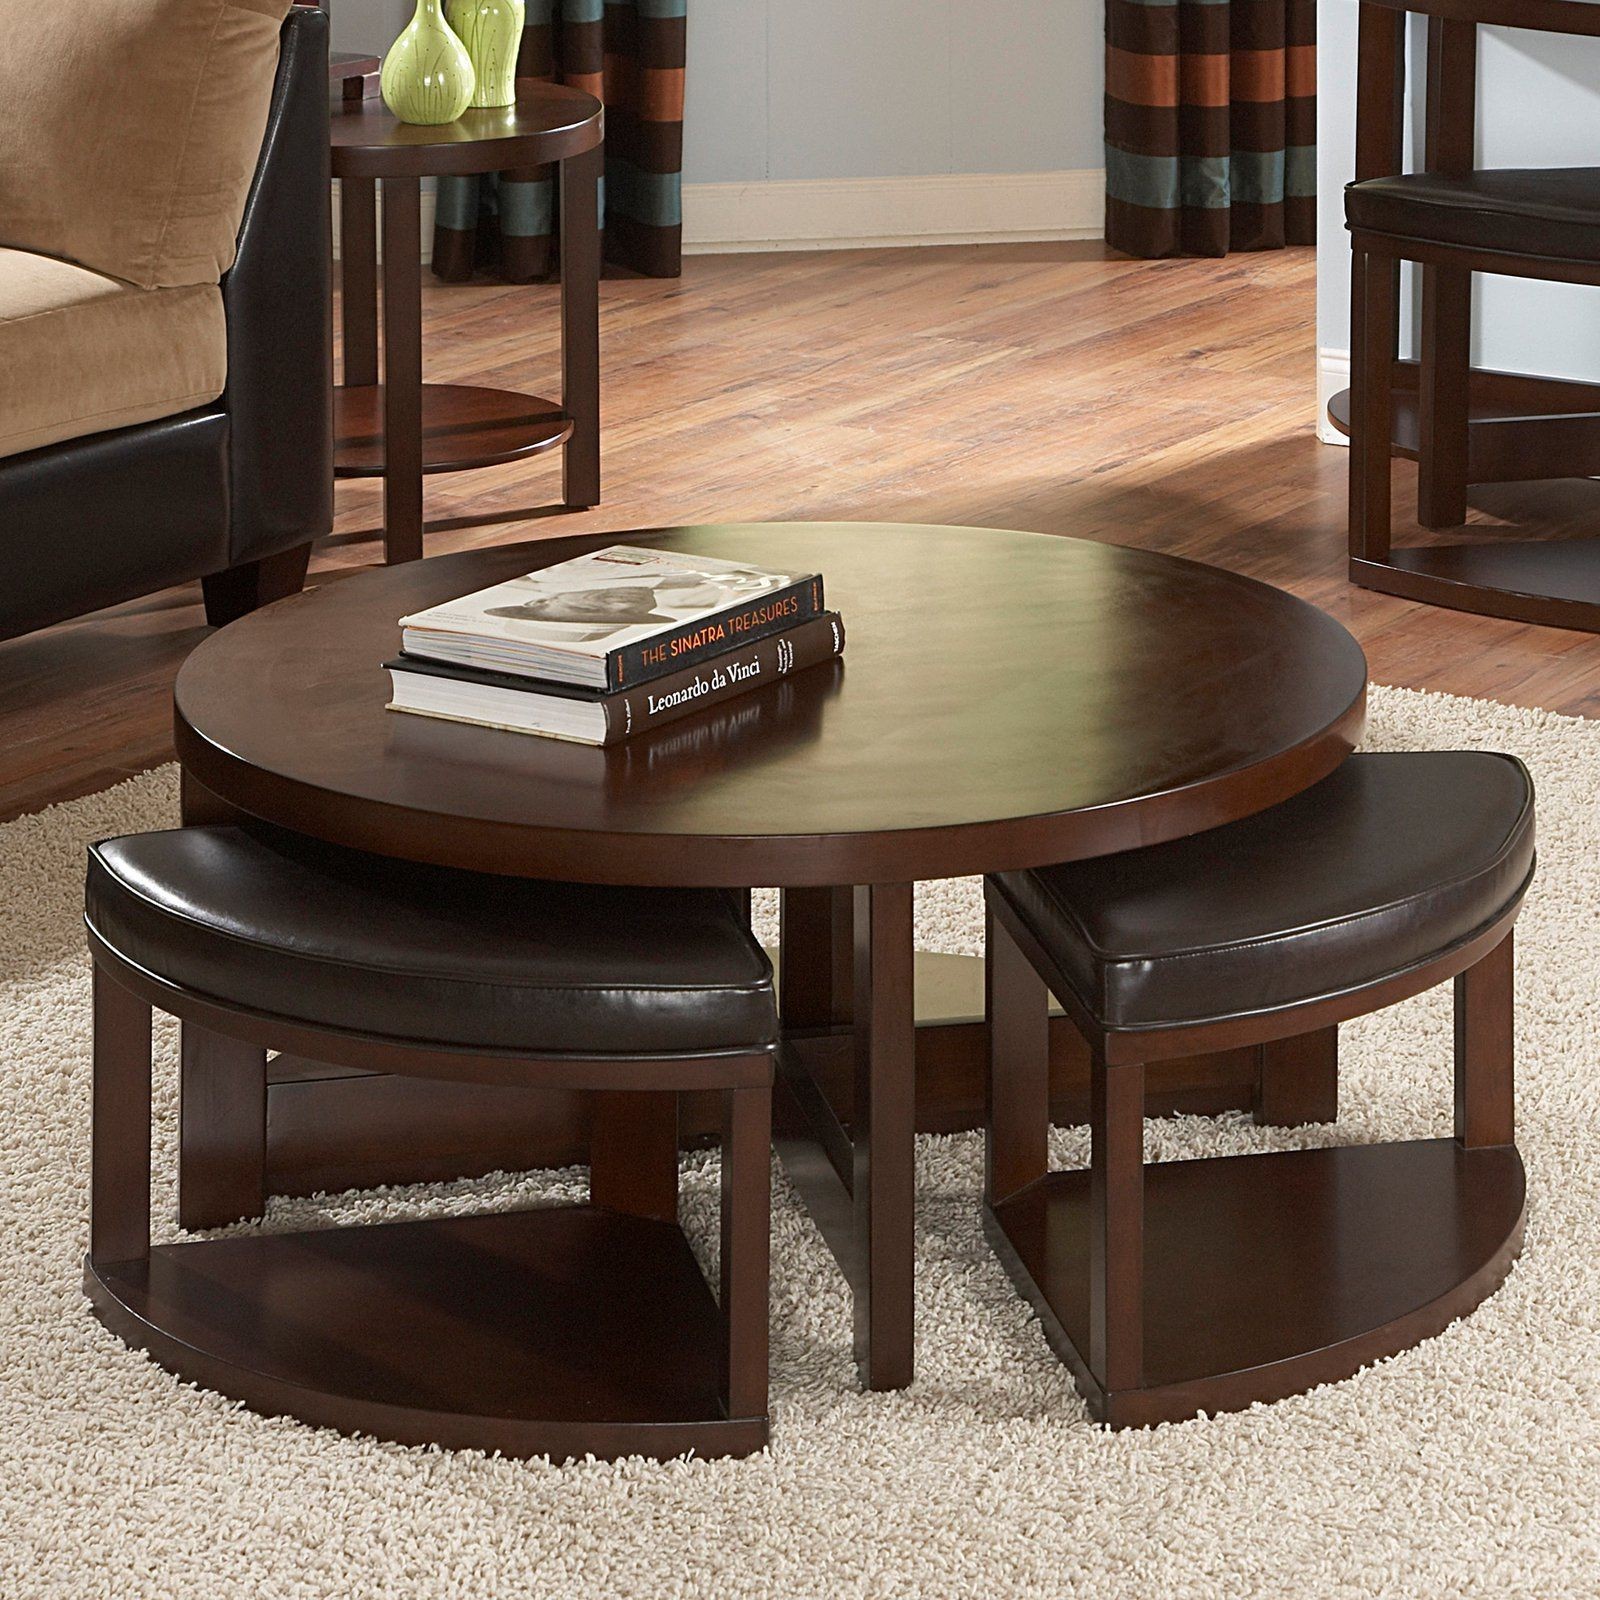 Homelegance brussel ii round brown cherry wood coffee table with